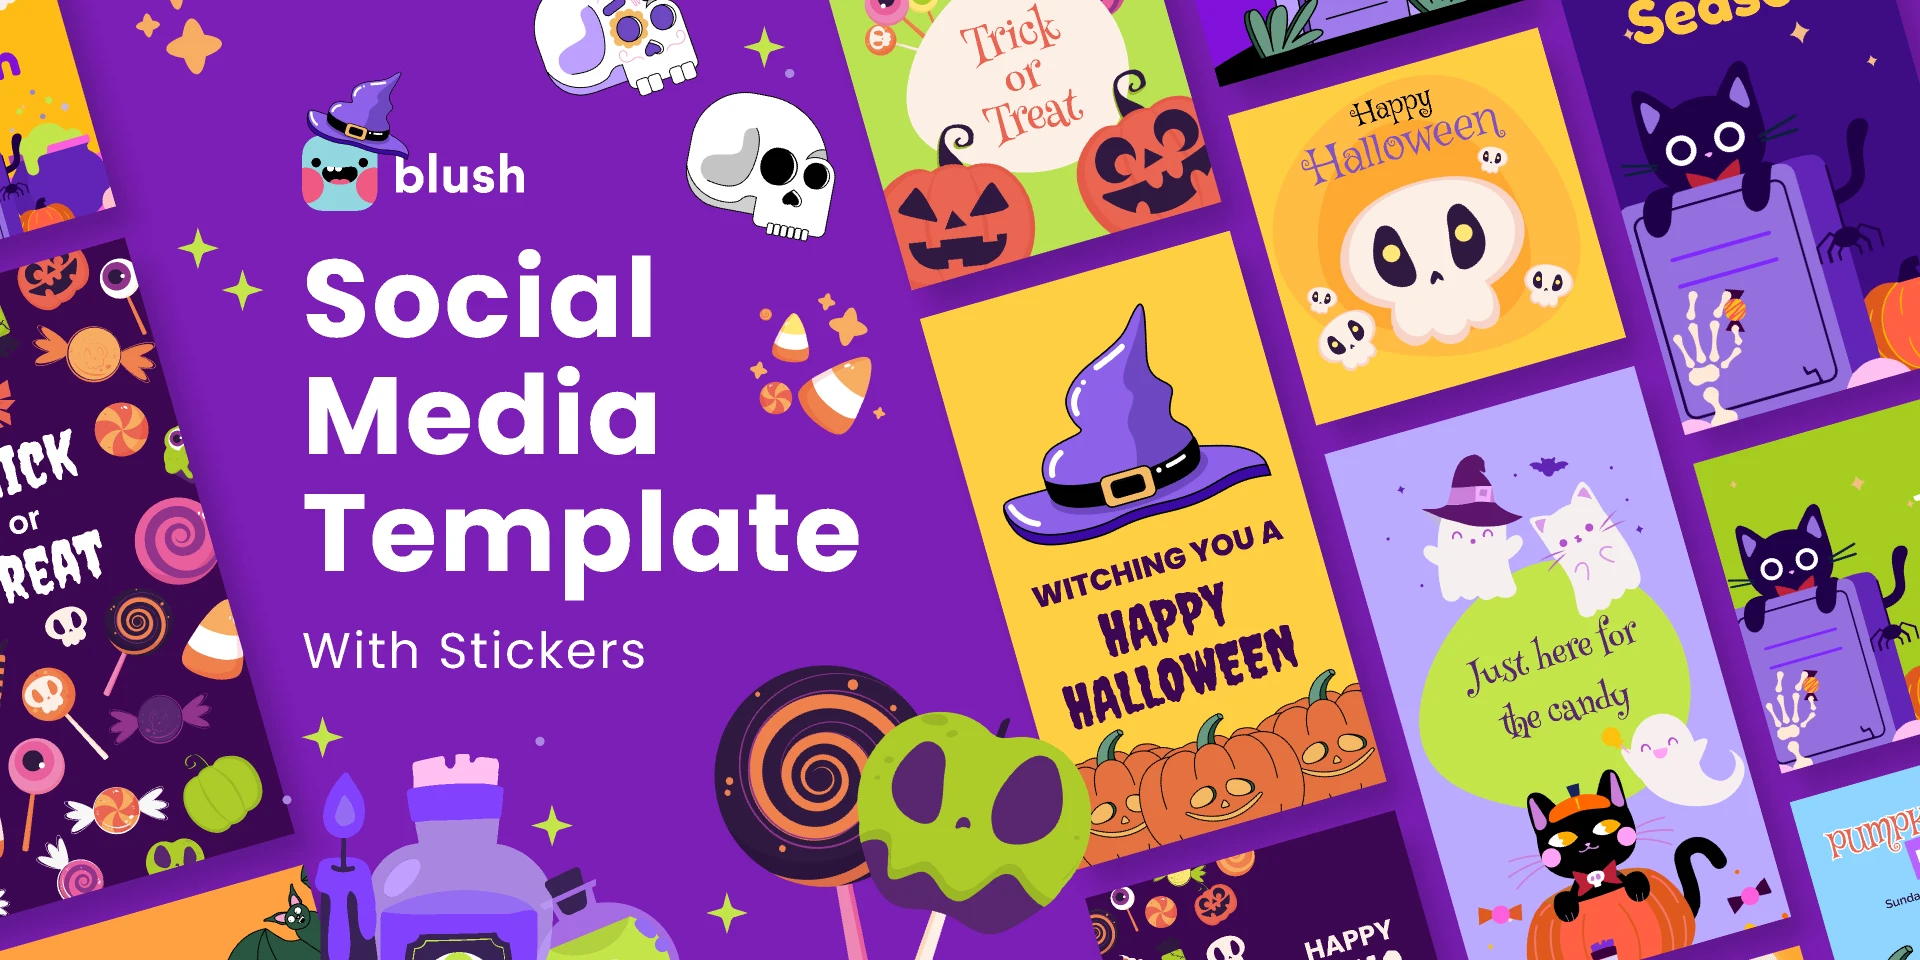 Social Media Template with Halloween Stickers for Figma and Adobe XD